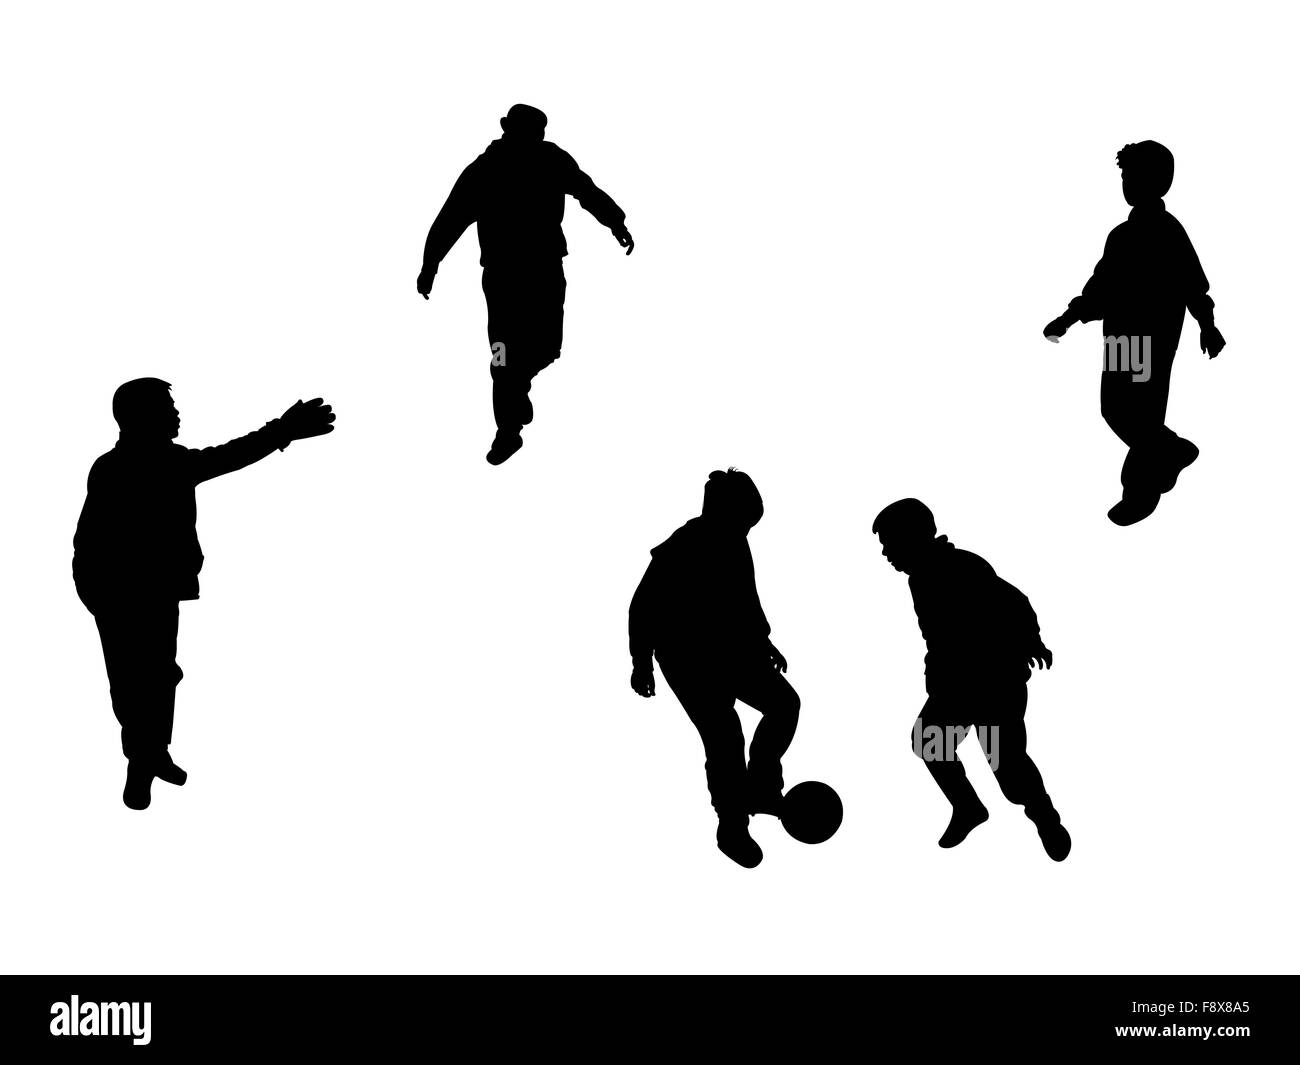 football players silhouettes Stock Photo